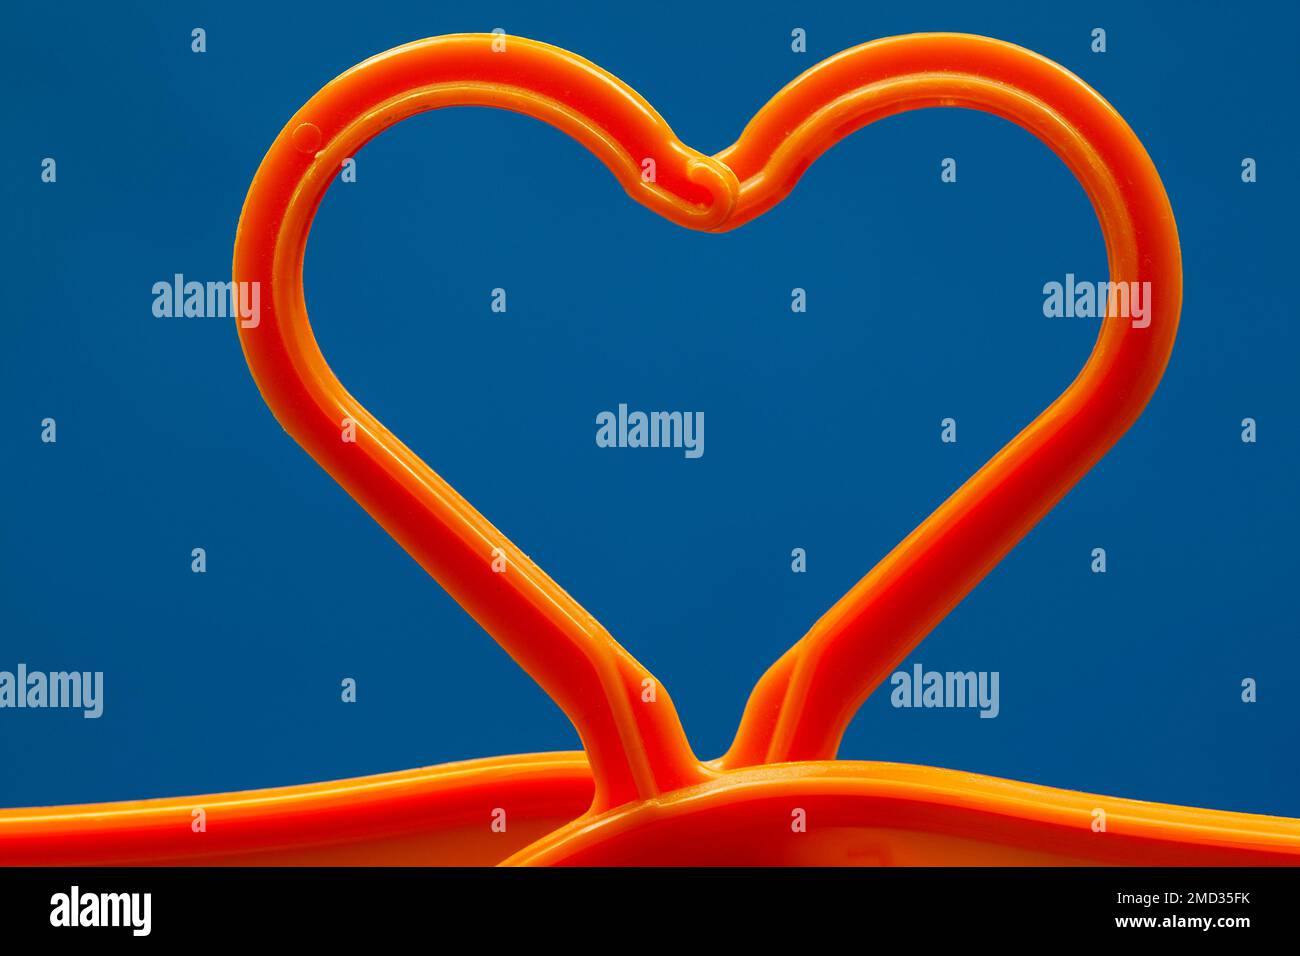 A heart for clothes. Two orange plastic hangers on a blue background that combine to form a heart shape. Stock Photo